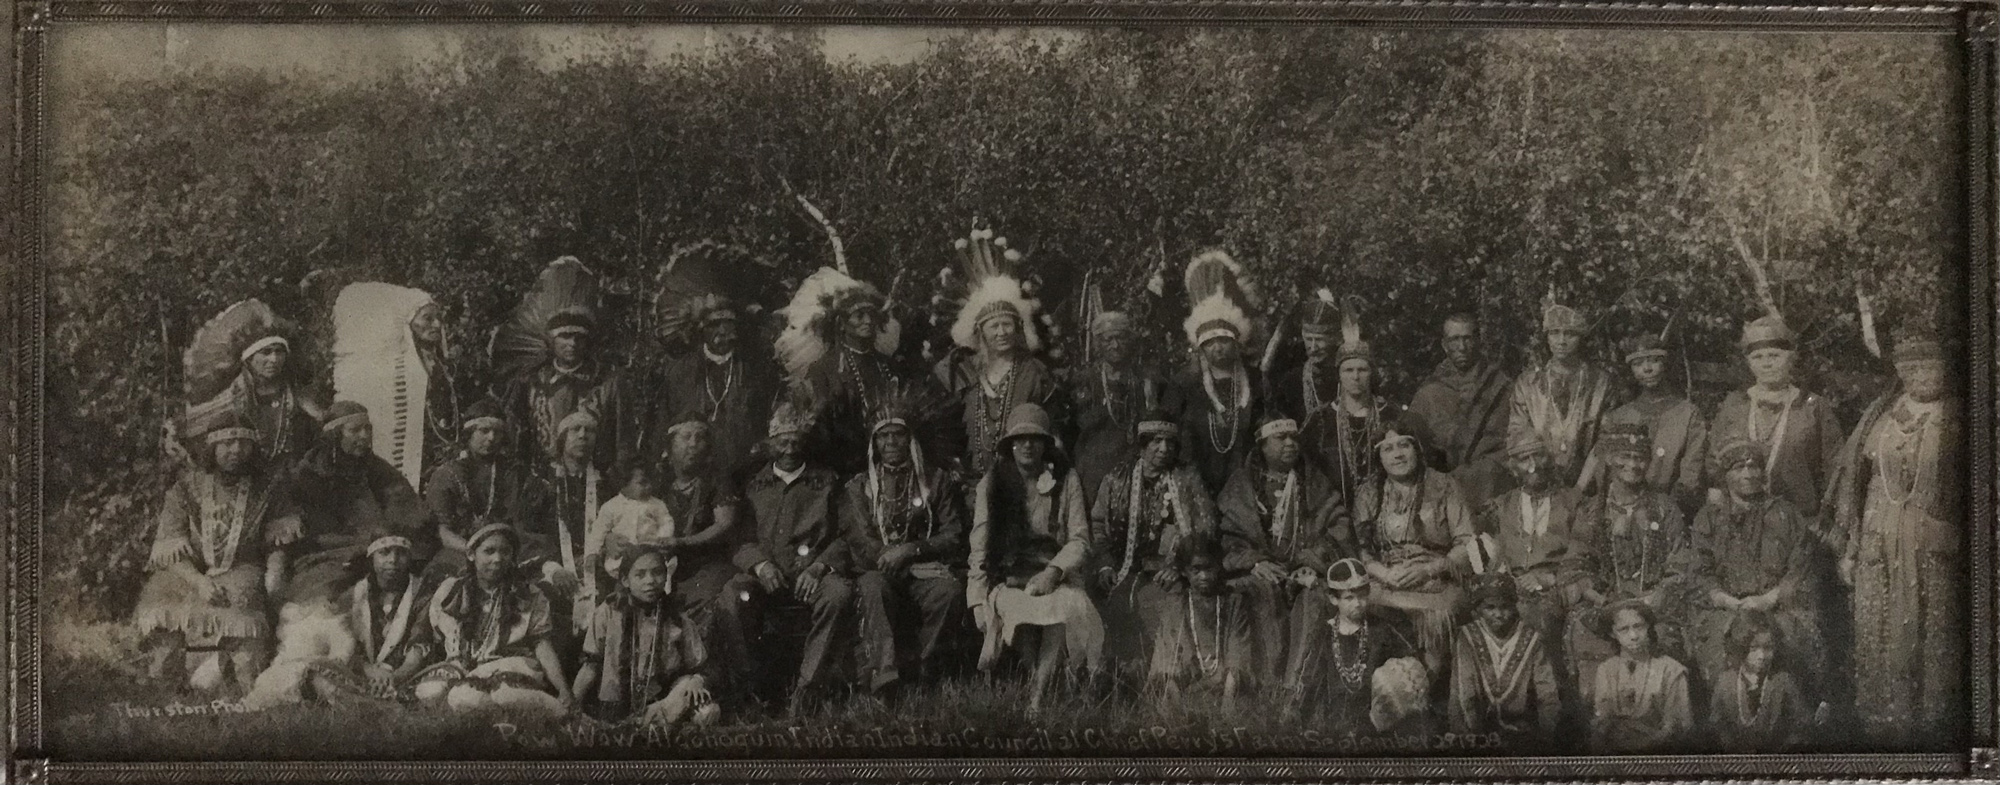 Sepia photograph of a group of people posing for a portrait in a range of North American Indigenous and 1920s-style clothing. Inscription reads, "Pow Wow Algonquin Indian Indian Council at Chief Perrys Farm September 29, 1928."